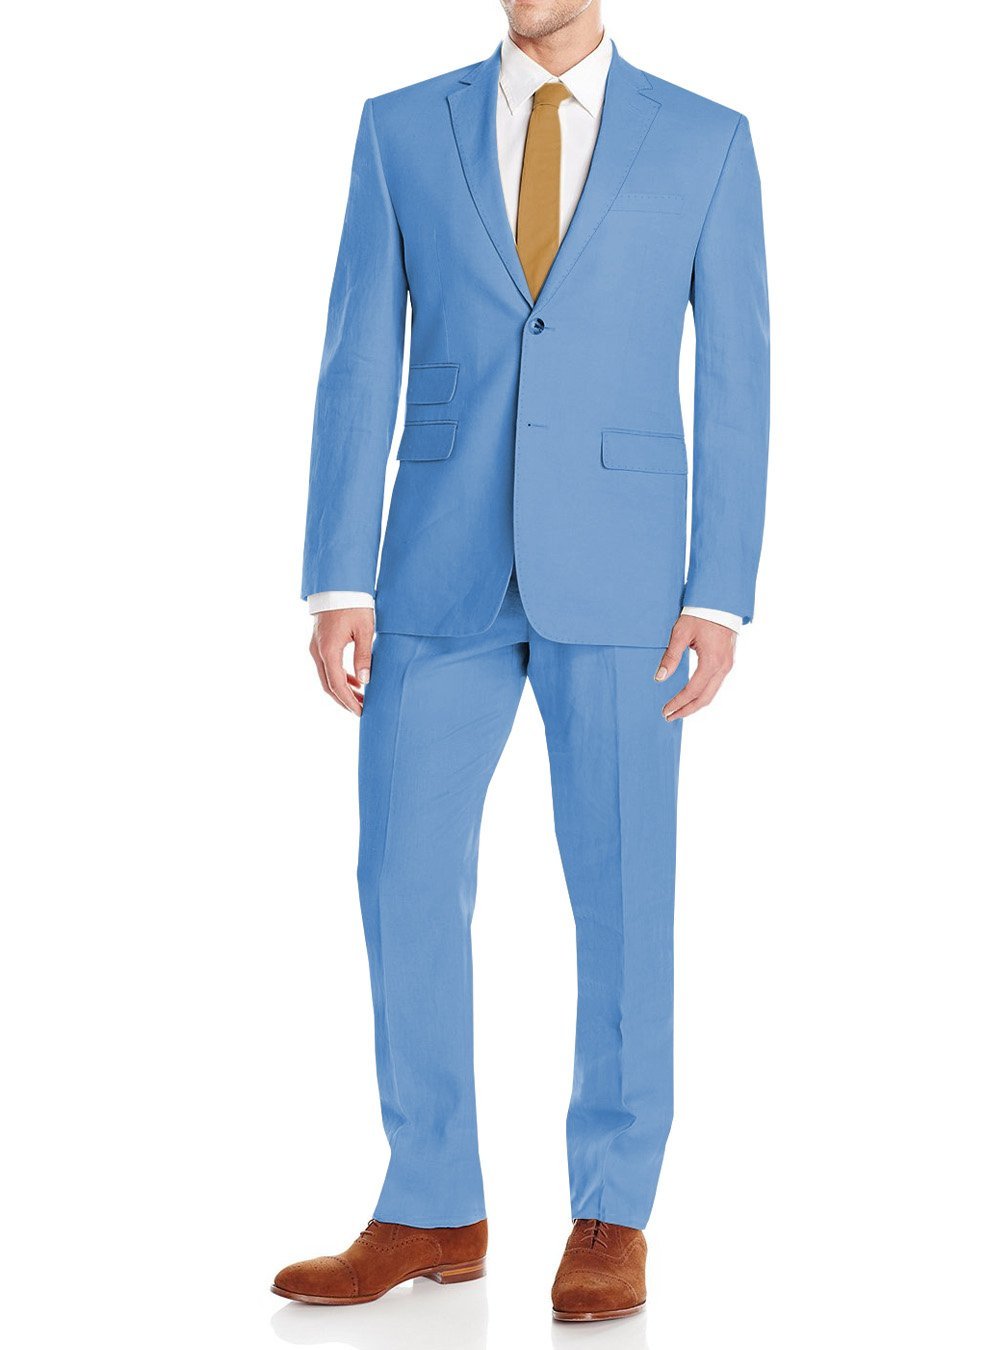 Gino Valentino Men's Modern Fit Two Button Two Piece Linen Suit